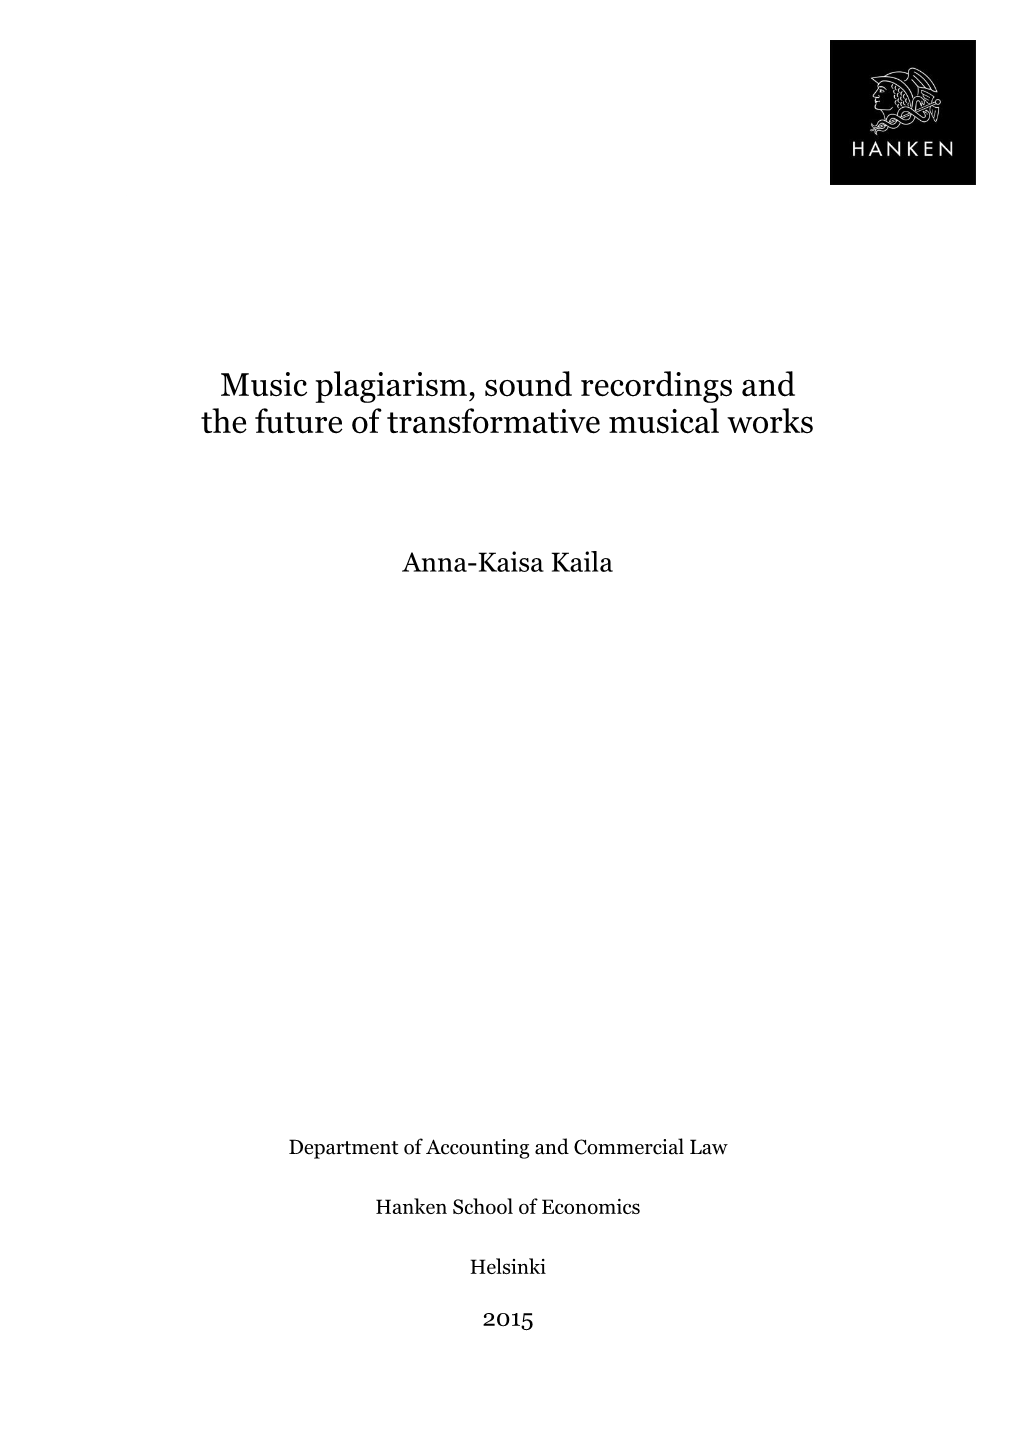 Music Plagiarism, Sound Recordings and the Future of Transformative Musical Works